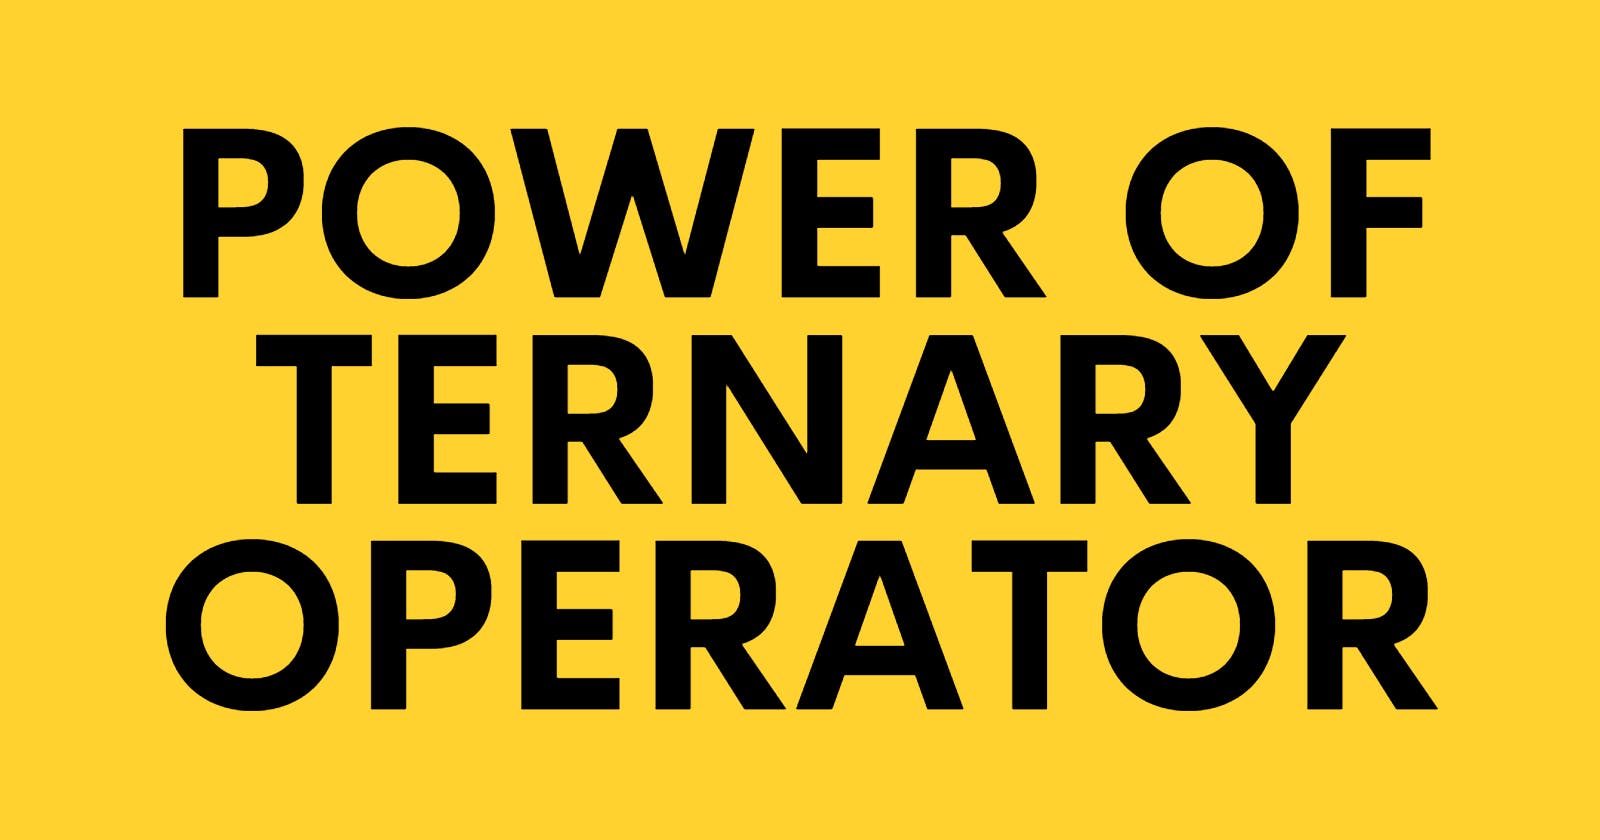 The ultimate power of Ternary Operator in JS